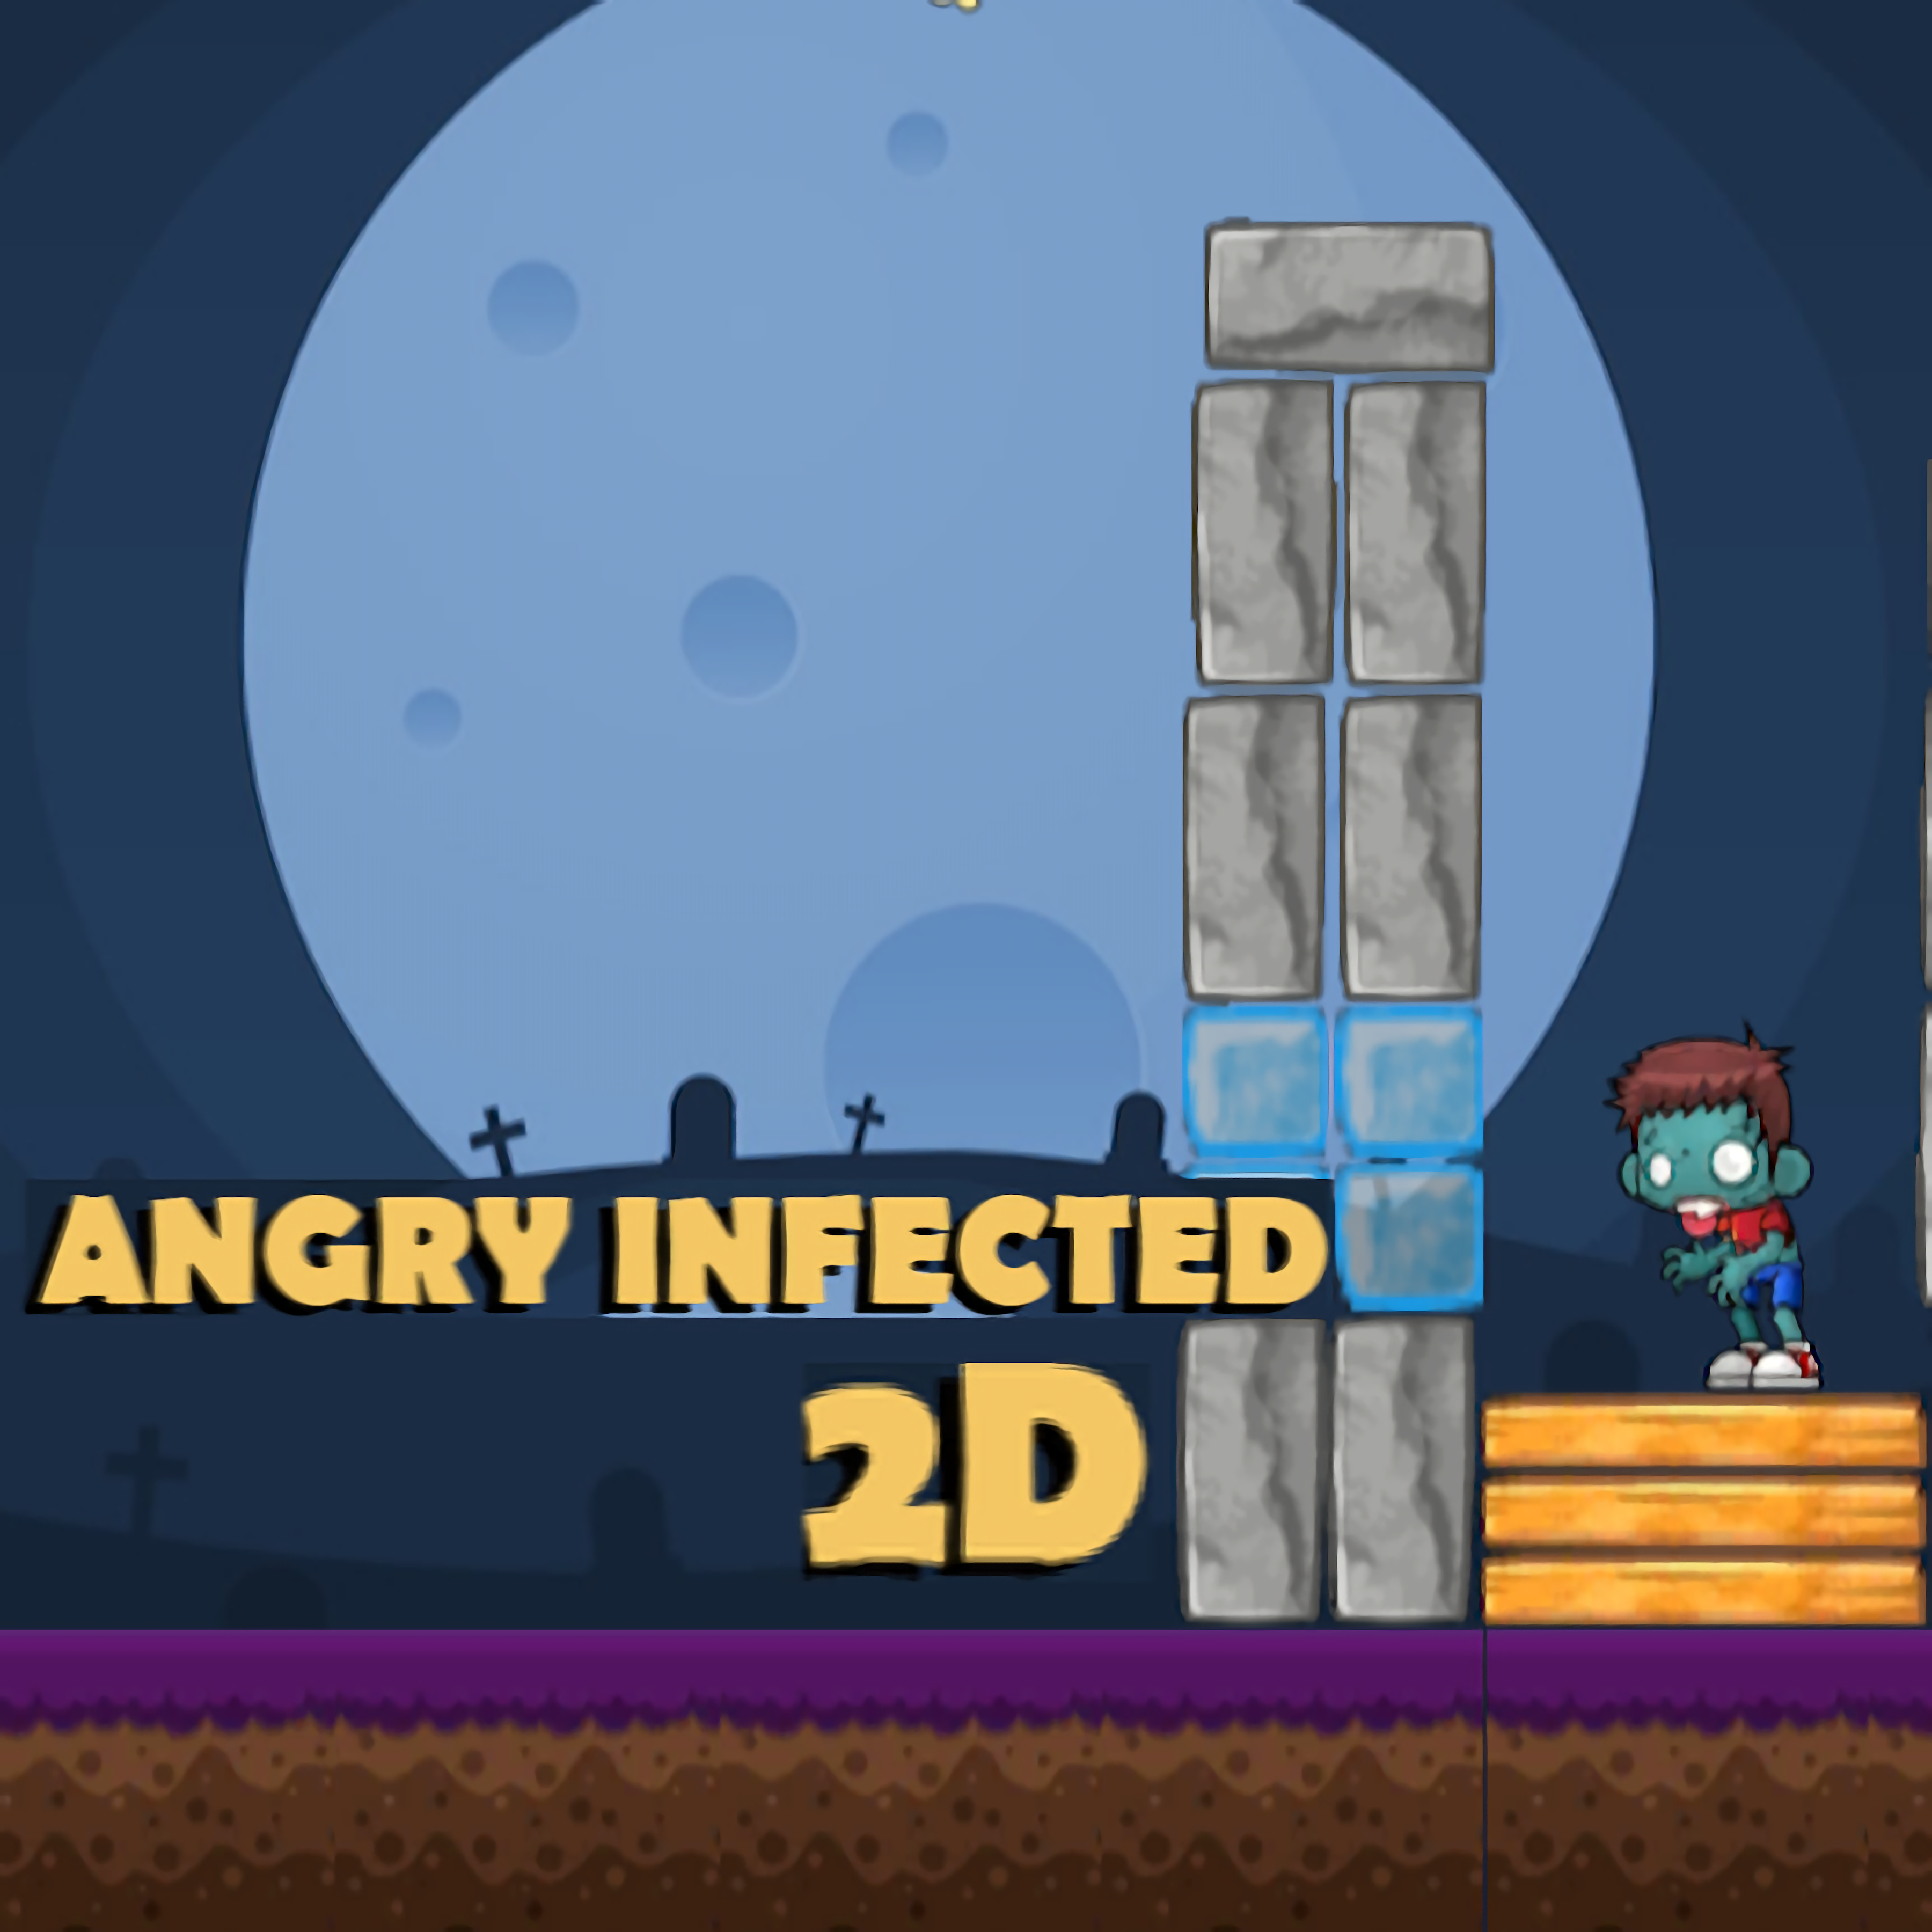 Angry Infected 2D